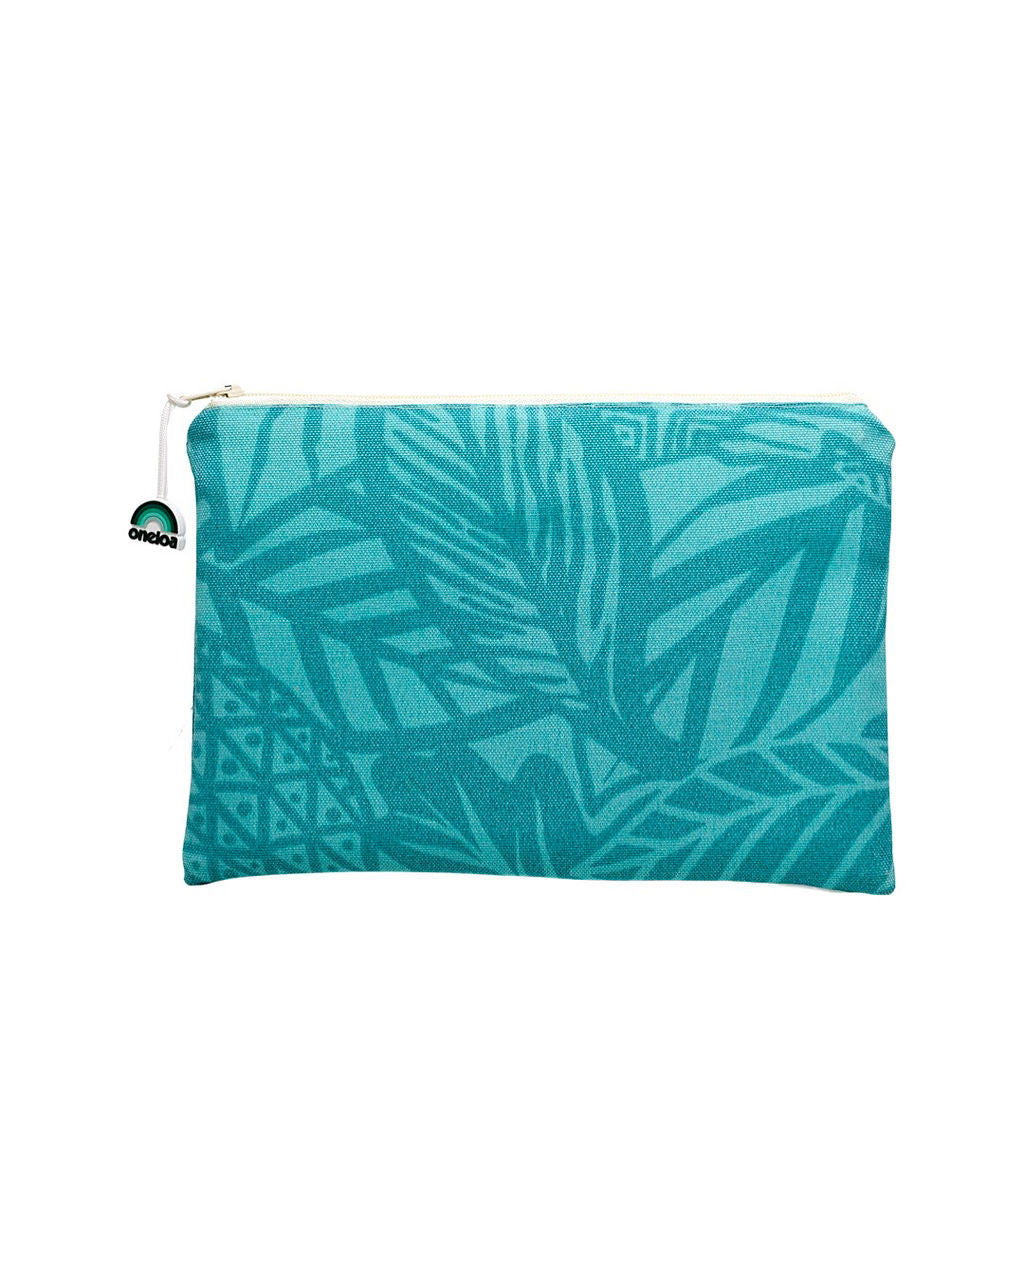 Oneloa Turquoise Tribal Leaf Clutch Size Wet/Dry Bag